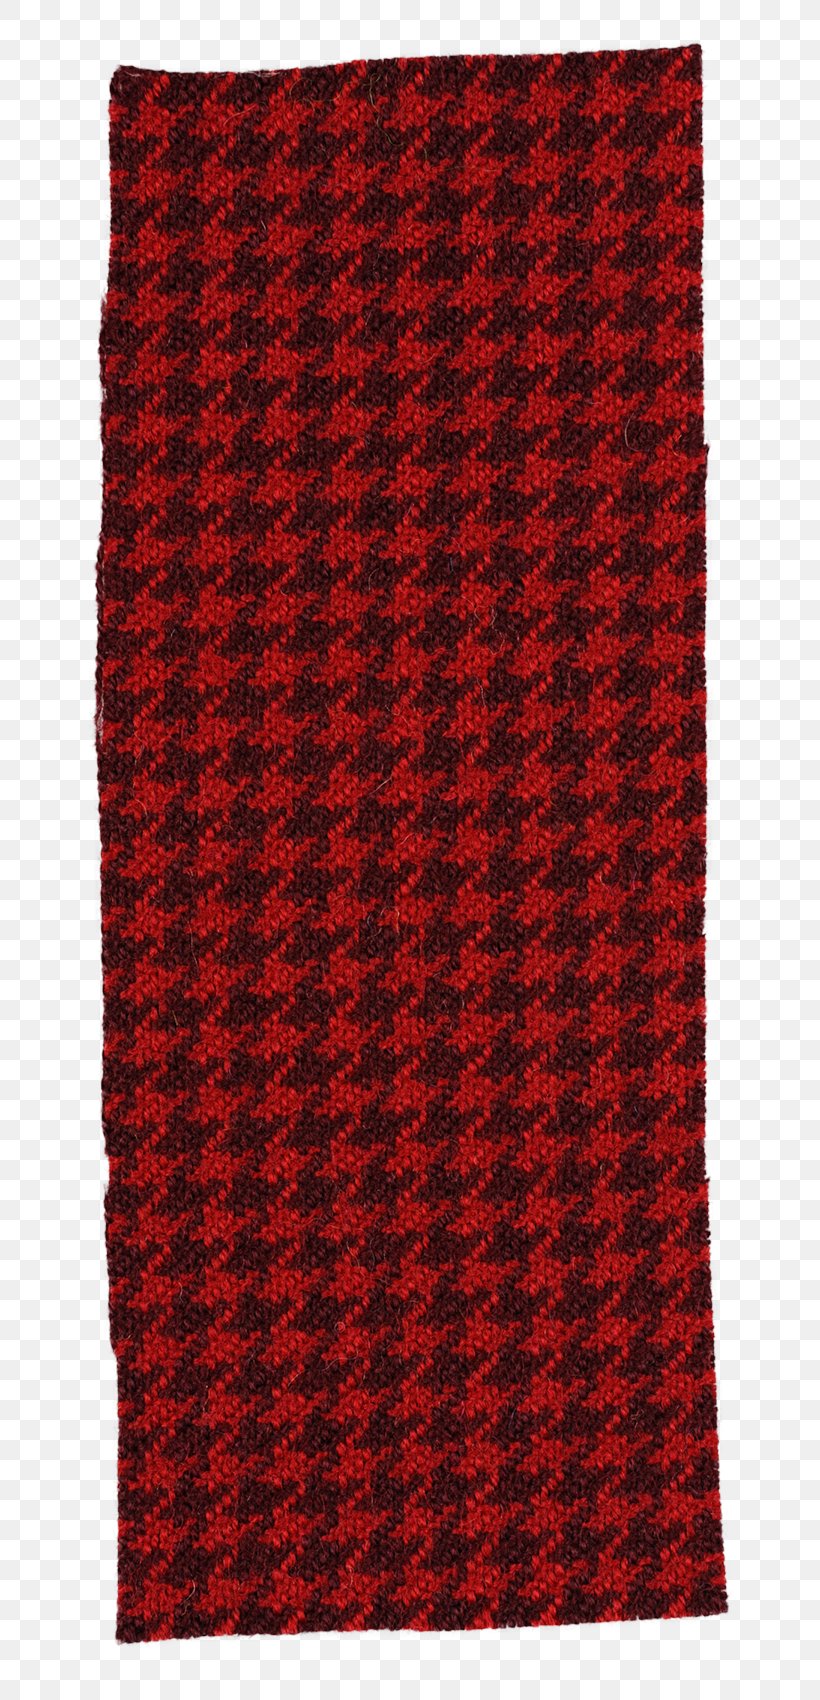 Rectangle Wool RED.M, PNG, 750x1700px, Rectangle, Red, Redm, Wool, Woolen Download Free